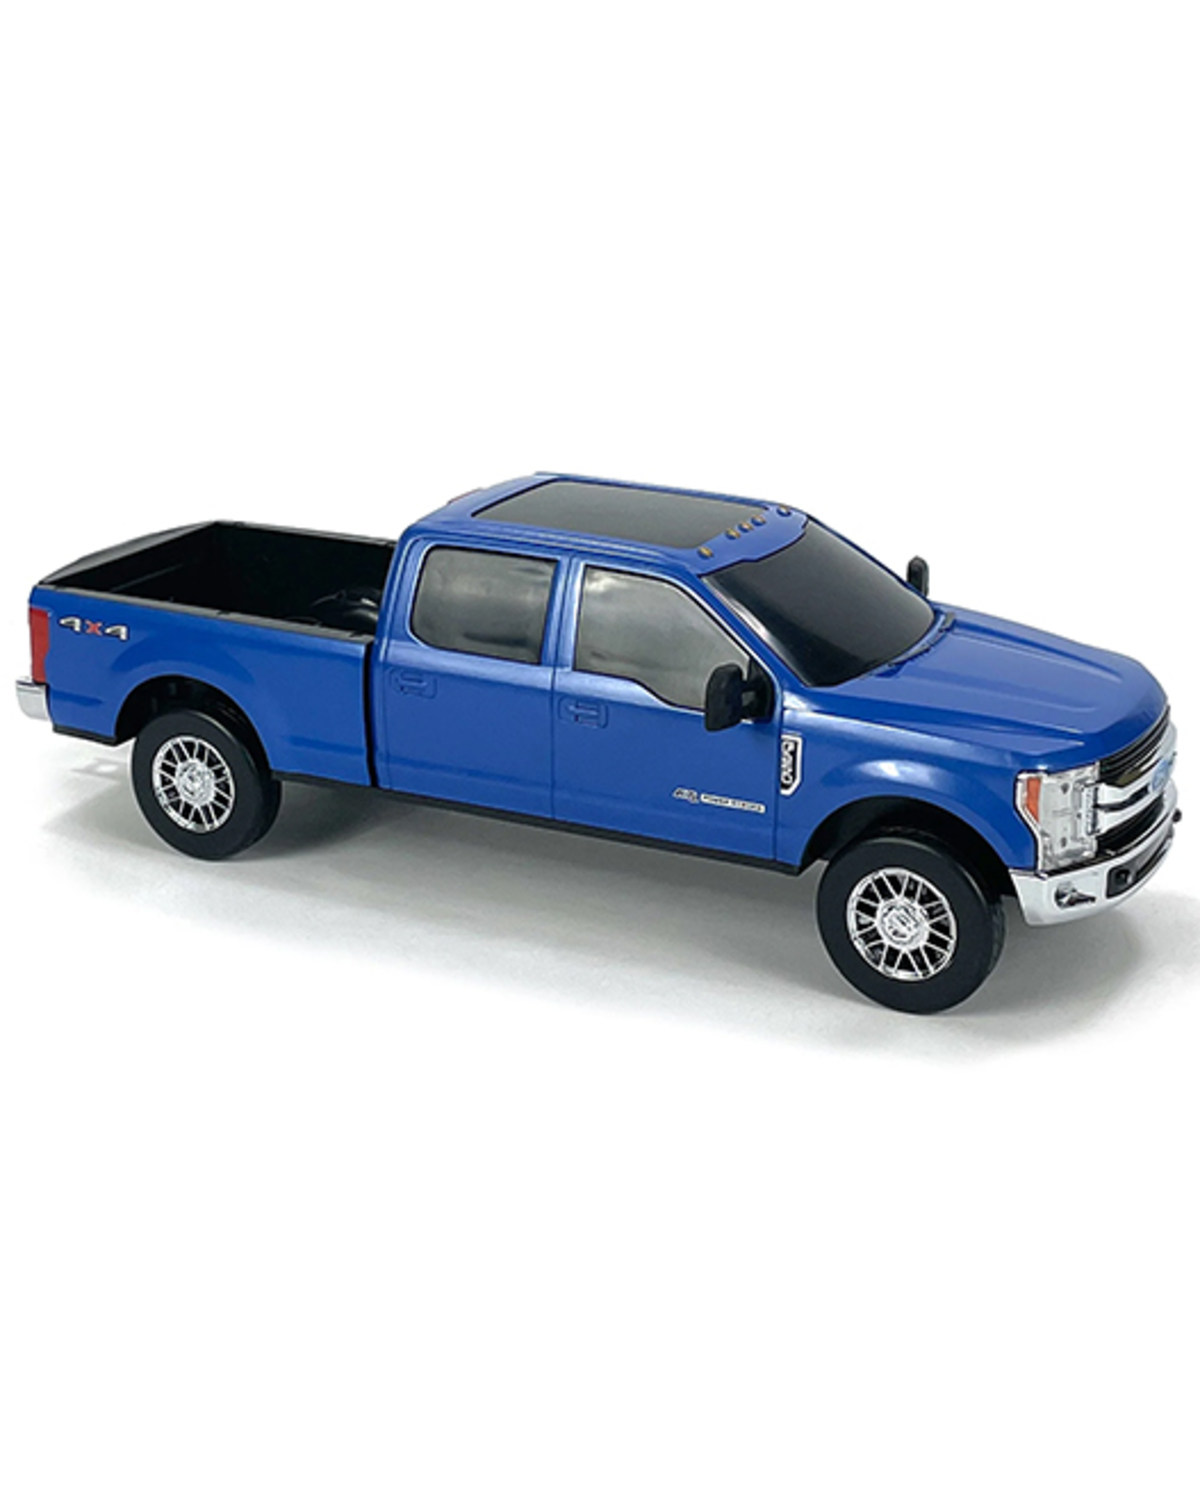 Big Country Ford F250 Super Duty Truck Toy